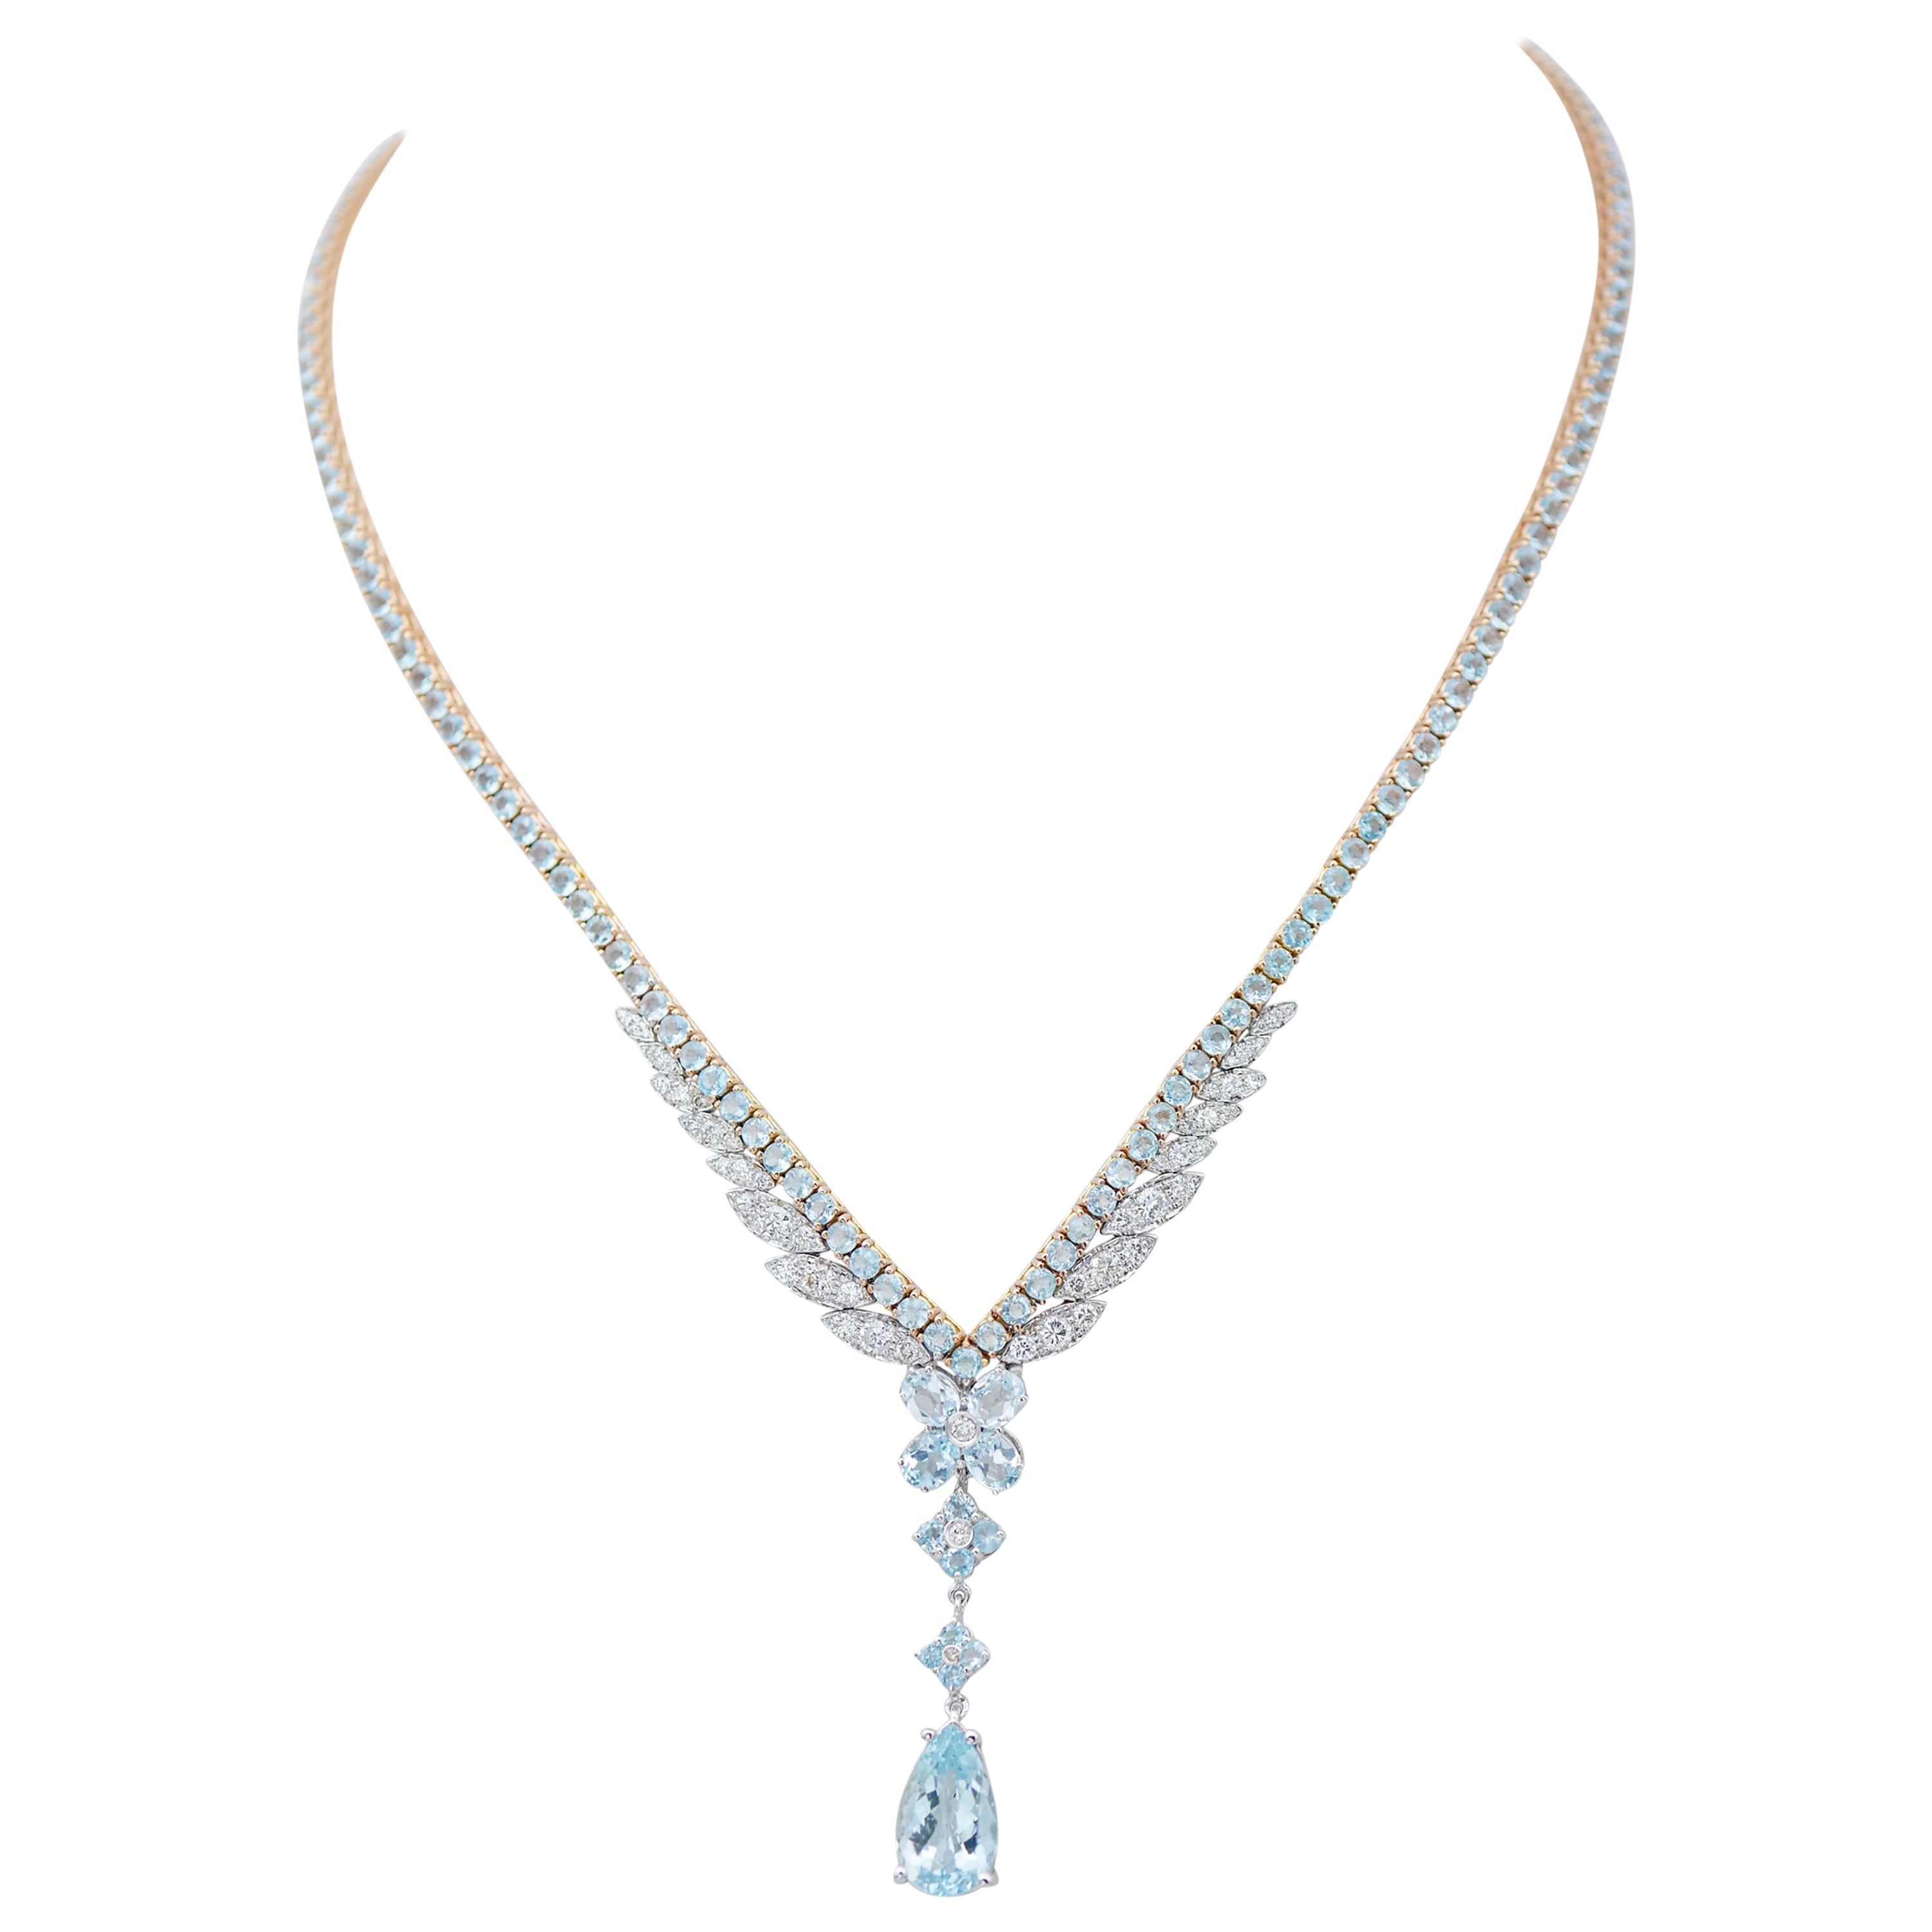 SHIPPING POLICY:
No additional costs will be added to this order.
Shipping costs will be totally covered by the seller (customs duties included).

Elegant tennis necklace in 14 kt rose gold structure mounted with aquamarine.In the fina